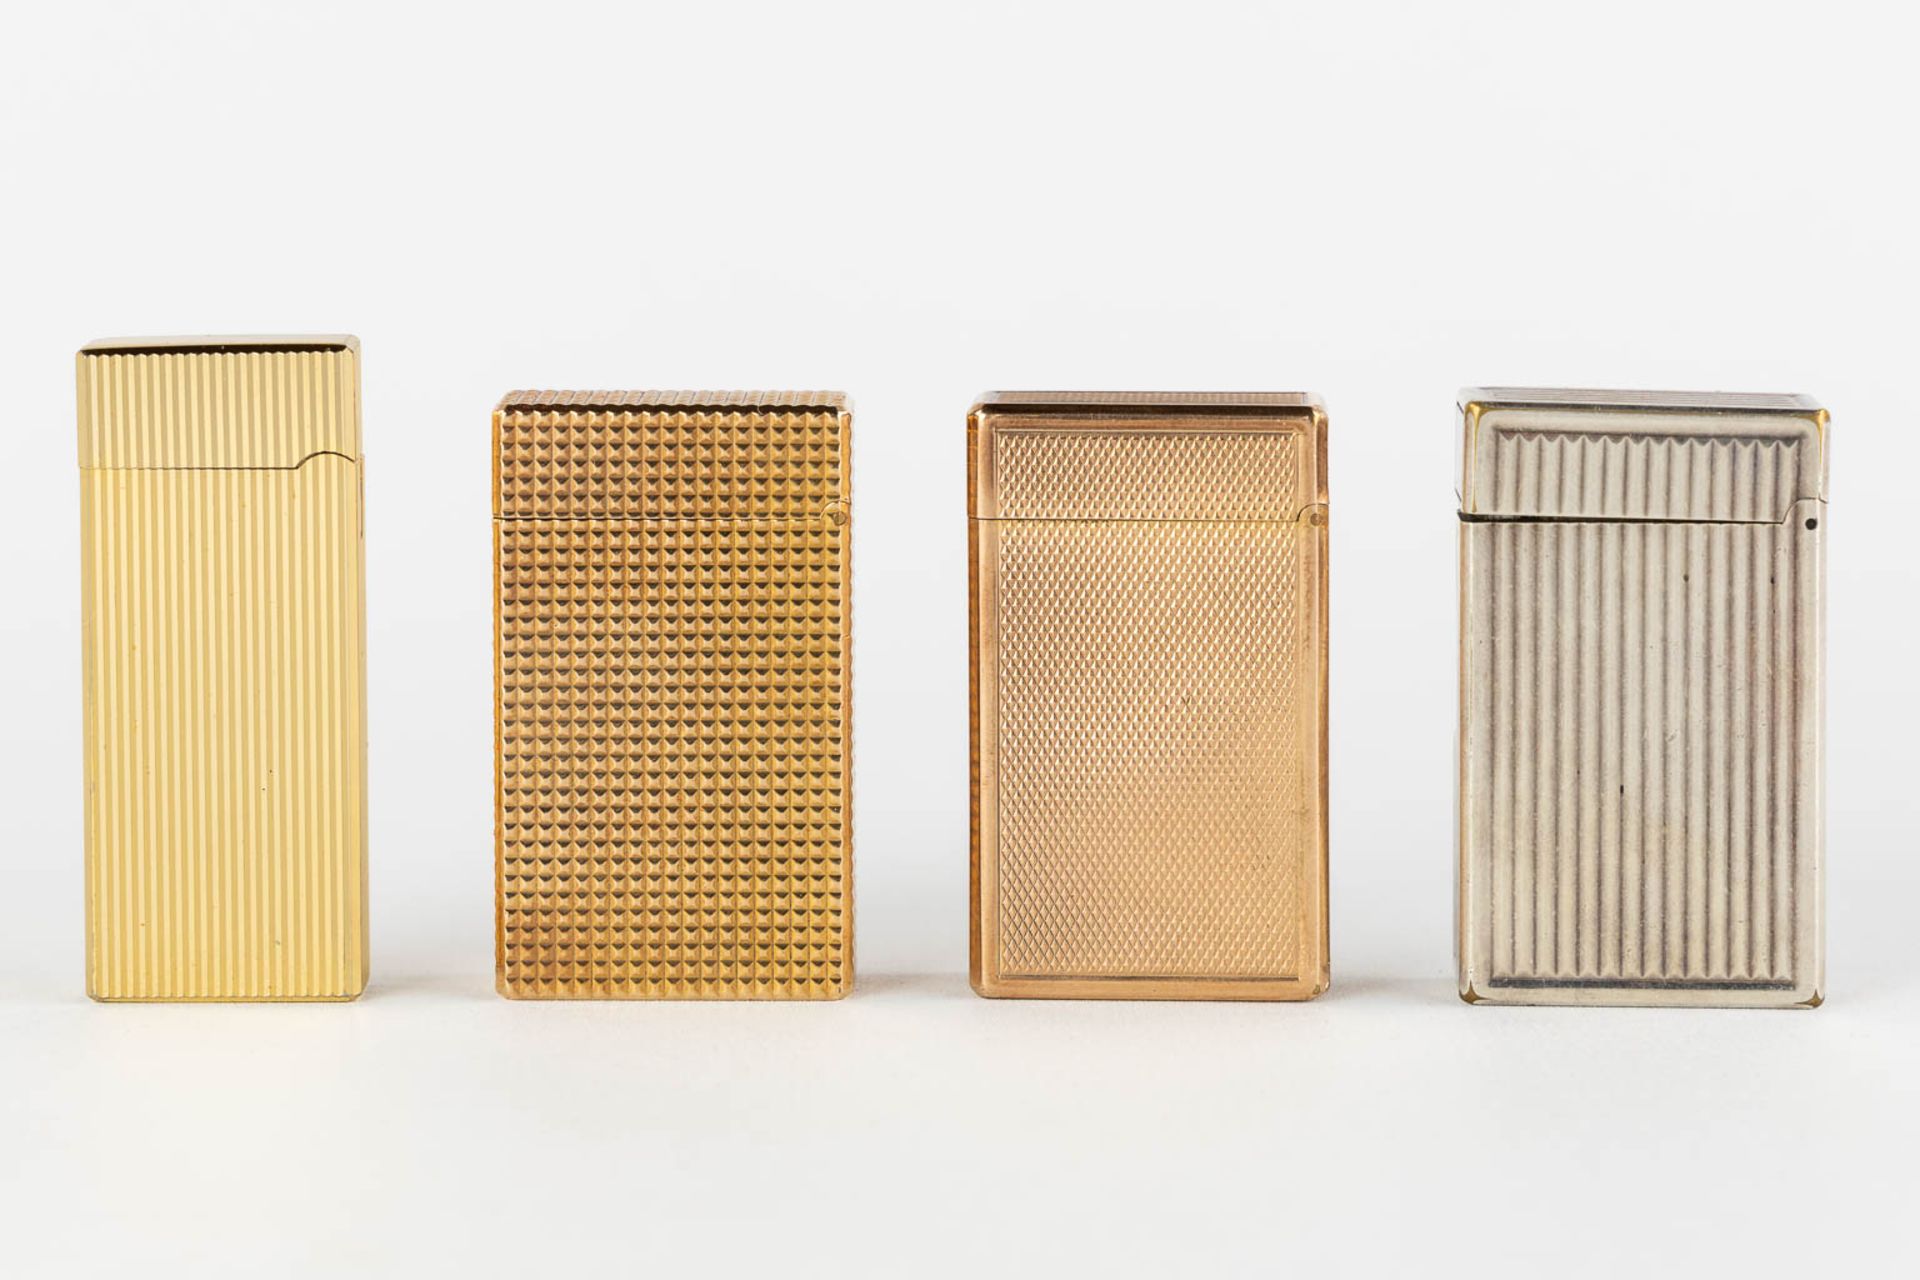 ST. Dupont, Three gold and silver plated lighters, added a Givency lighter. (L:1 x W:3,5 x H:6 cm) - Image 9 of 14